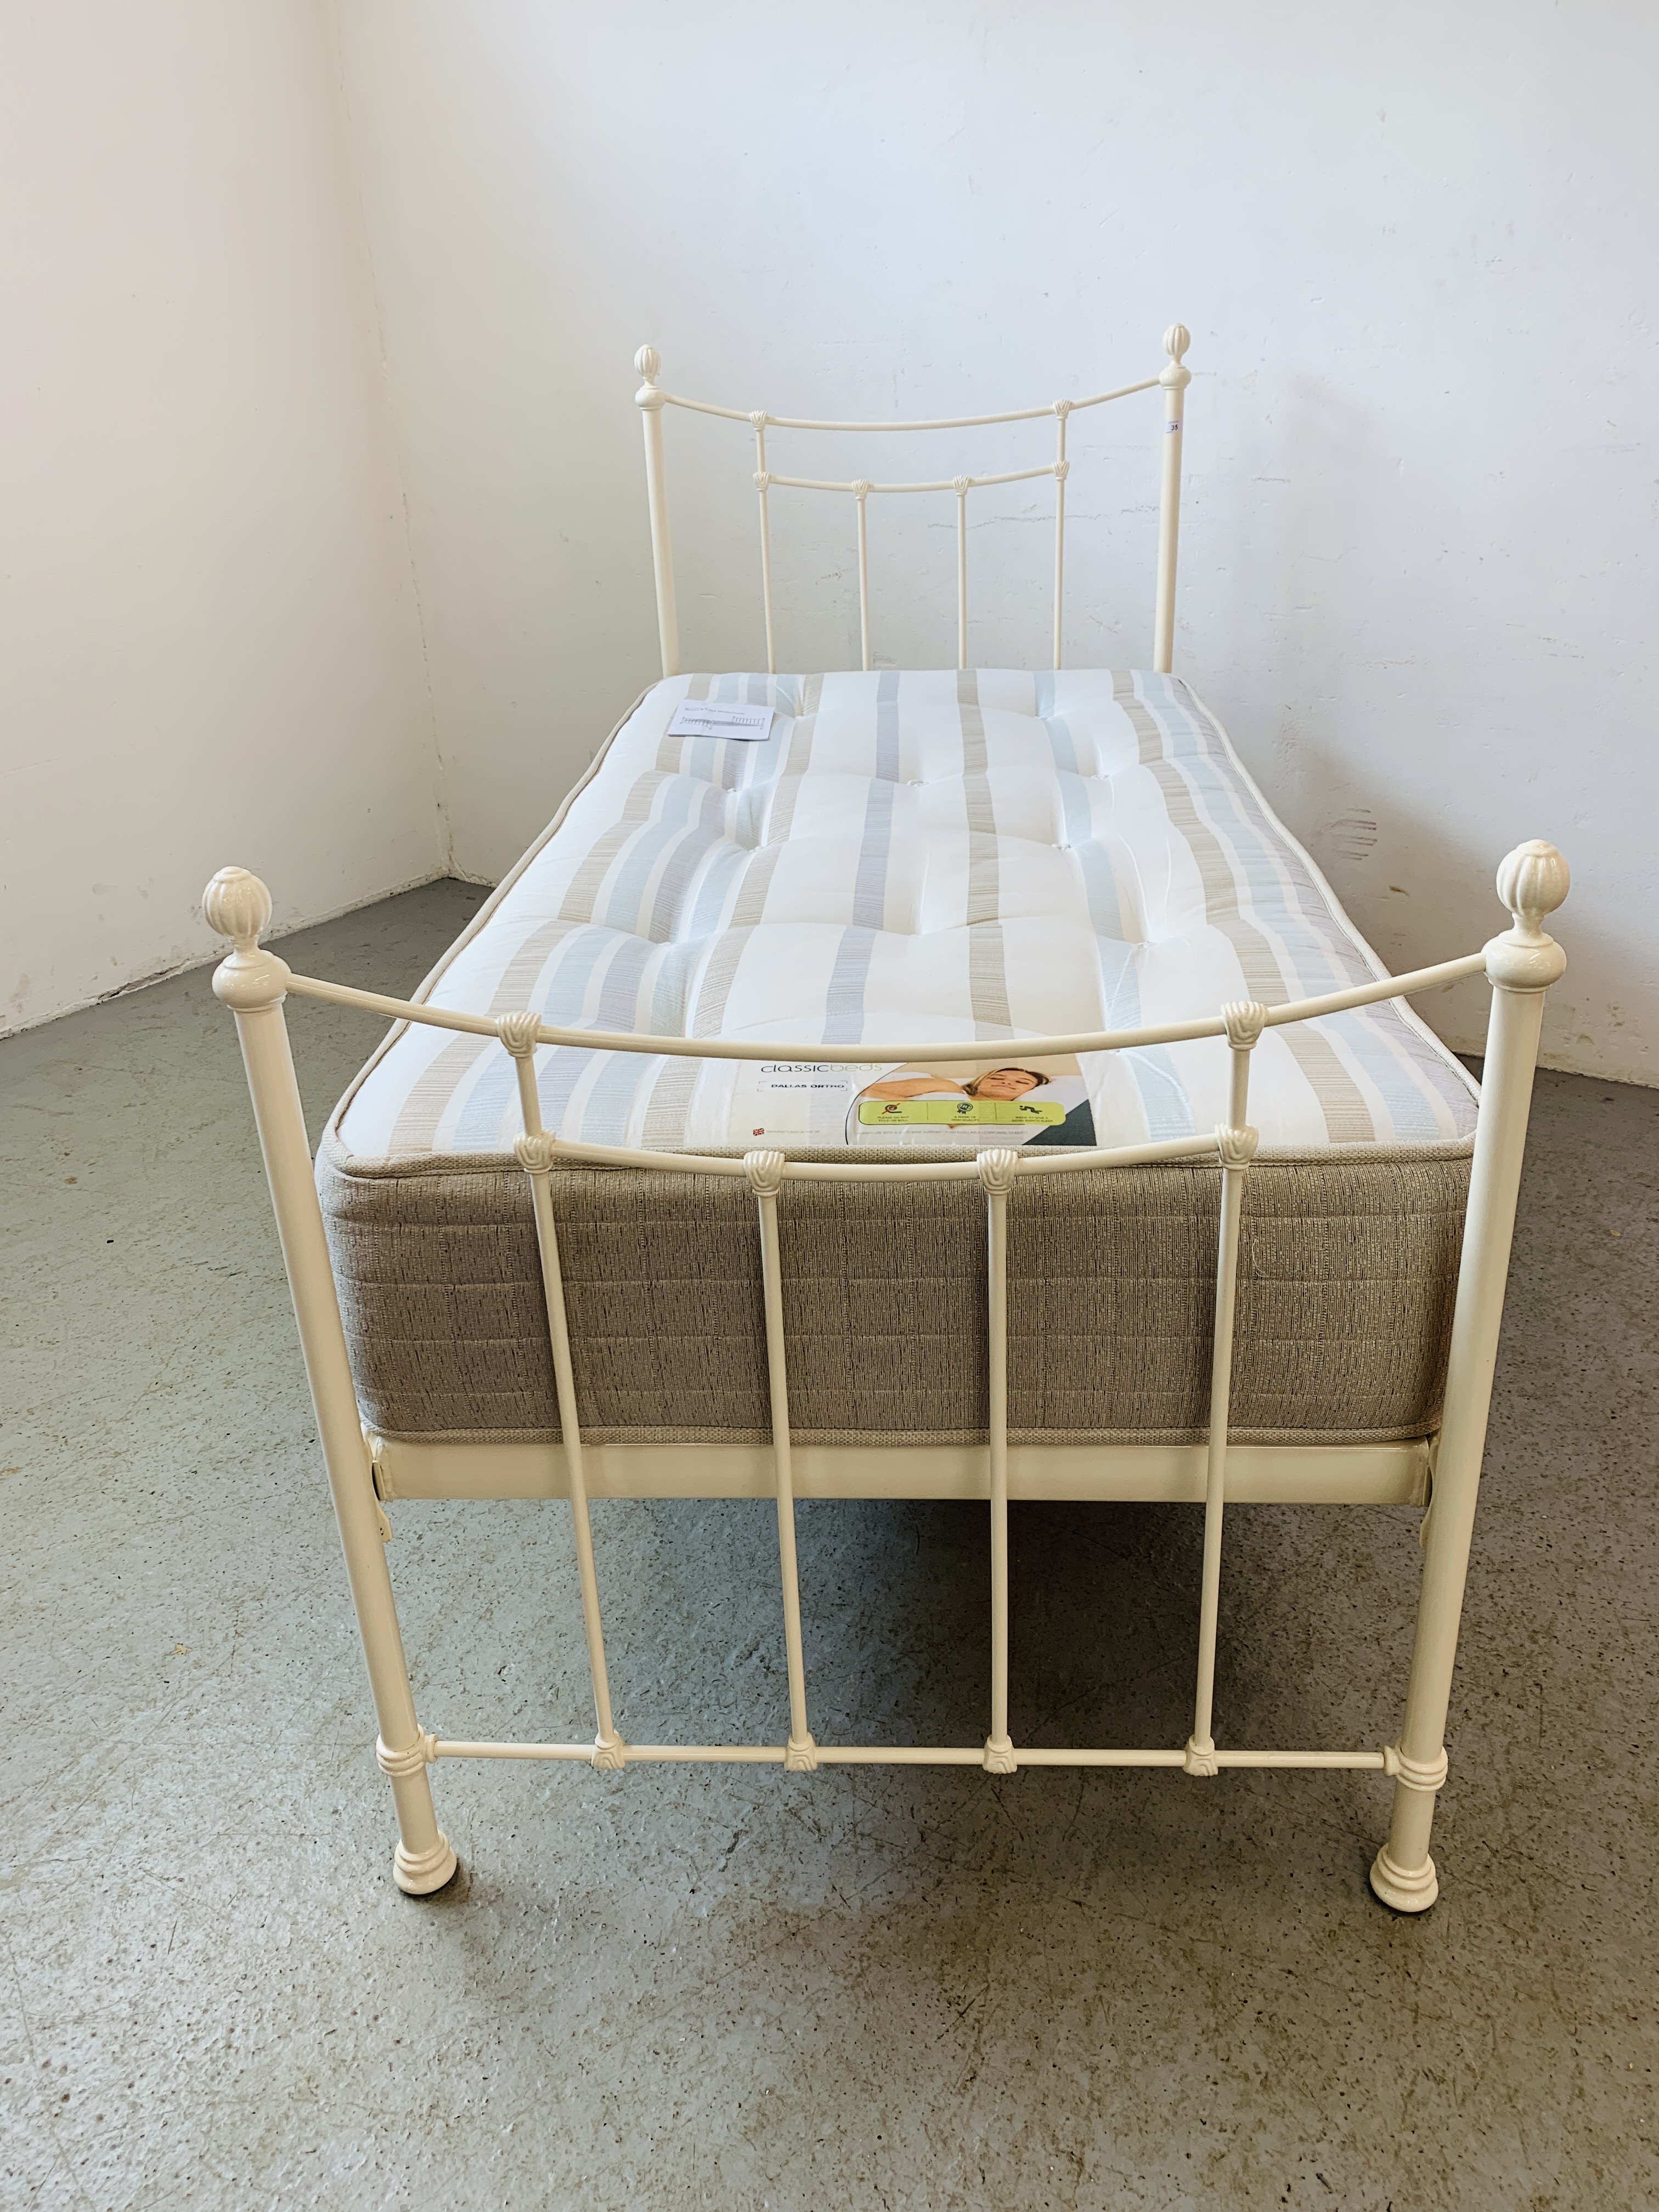 QUALITY MODERN METAL FRAMED SINGLE BED FRAME & CLASSIC BEDS DALLAS ORTHO MATTRESS - Image 2 of 13